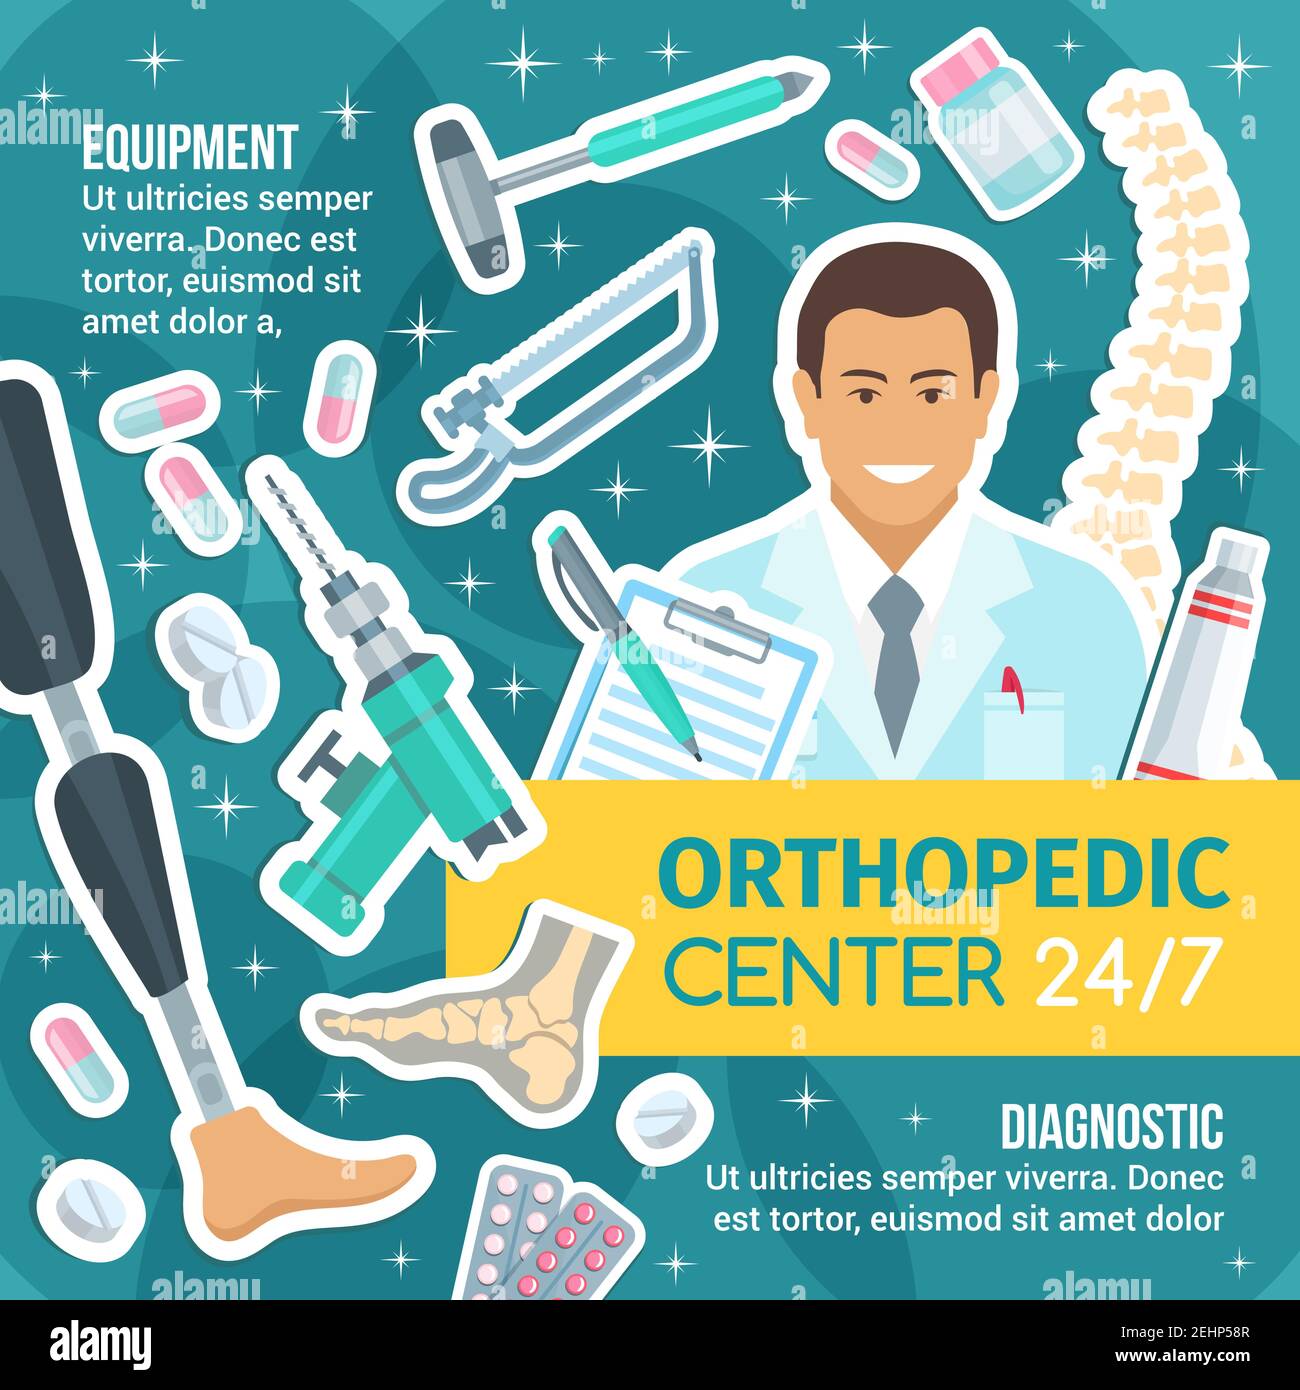 Orthopedics, traumatology and rheumatology medicine. Vector joints and bones, healthy human spine and foot, prosthesis, surgery instruments, drill and Stock Vector